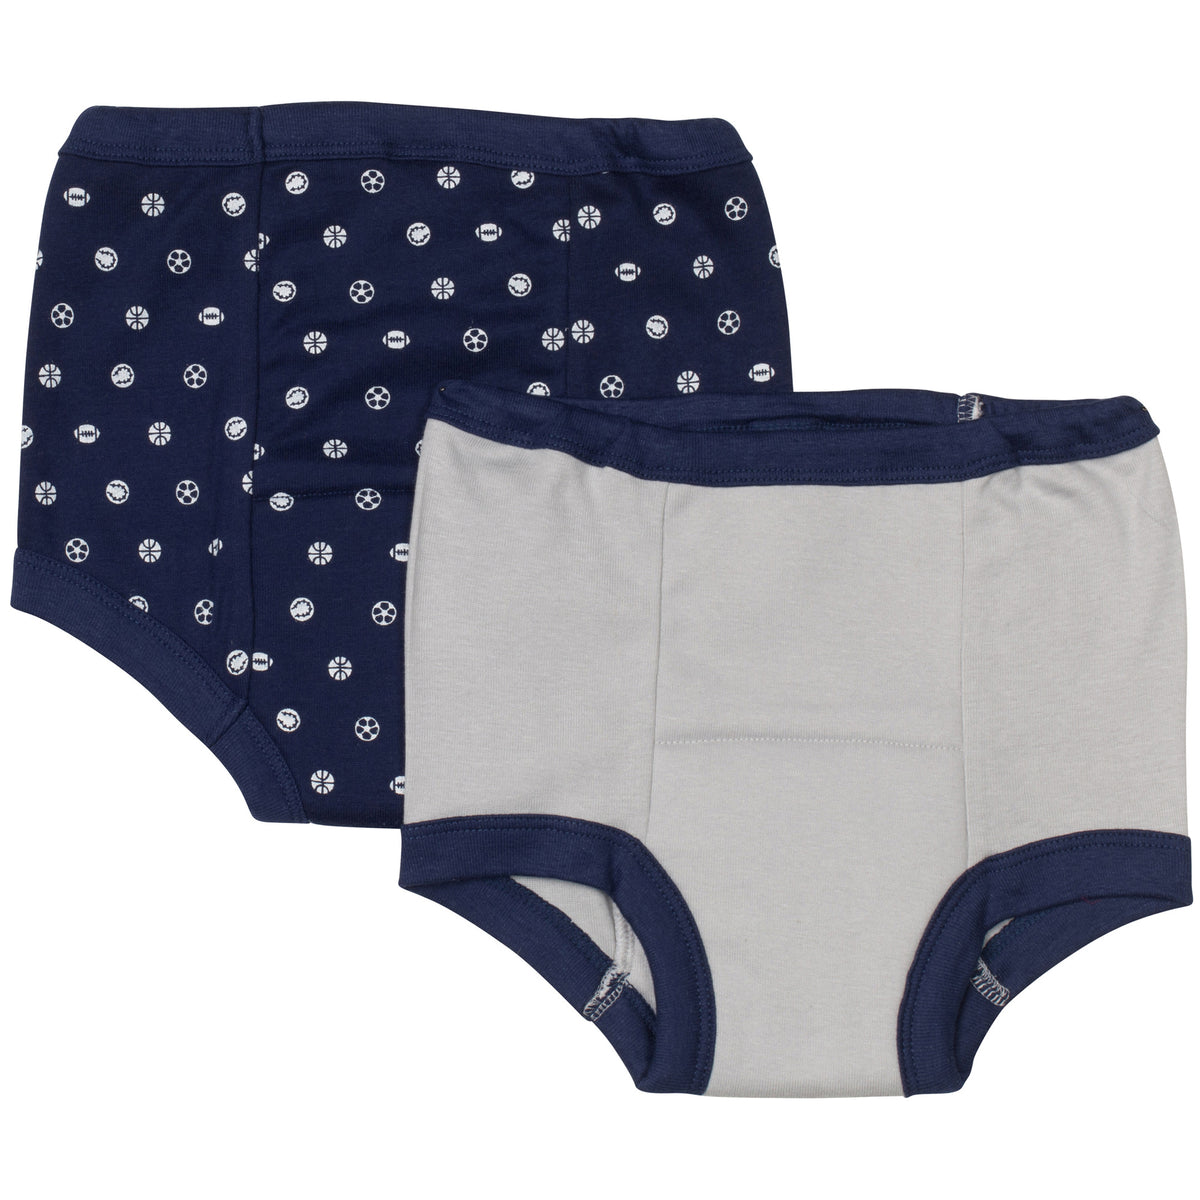 Gerber Cloth Toilet Training Pants Two 3t Twin Packs(4pants)in Cars/navy  Stripe for sale online